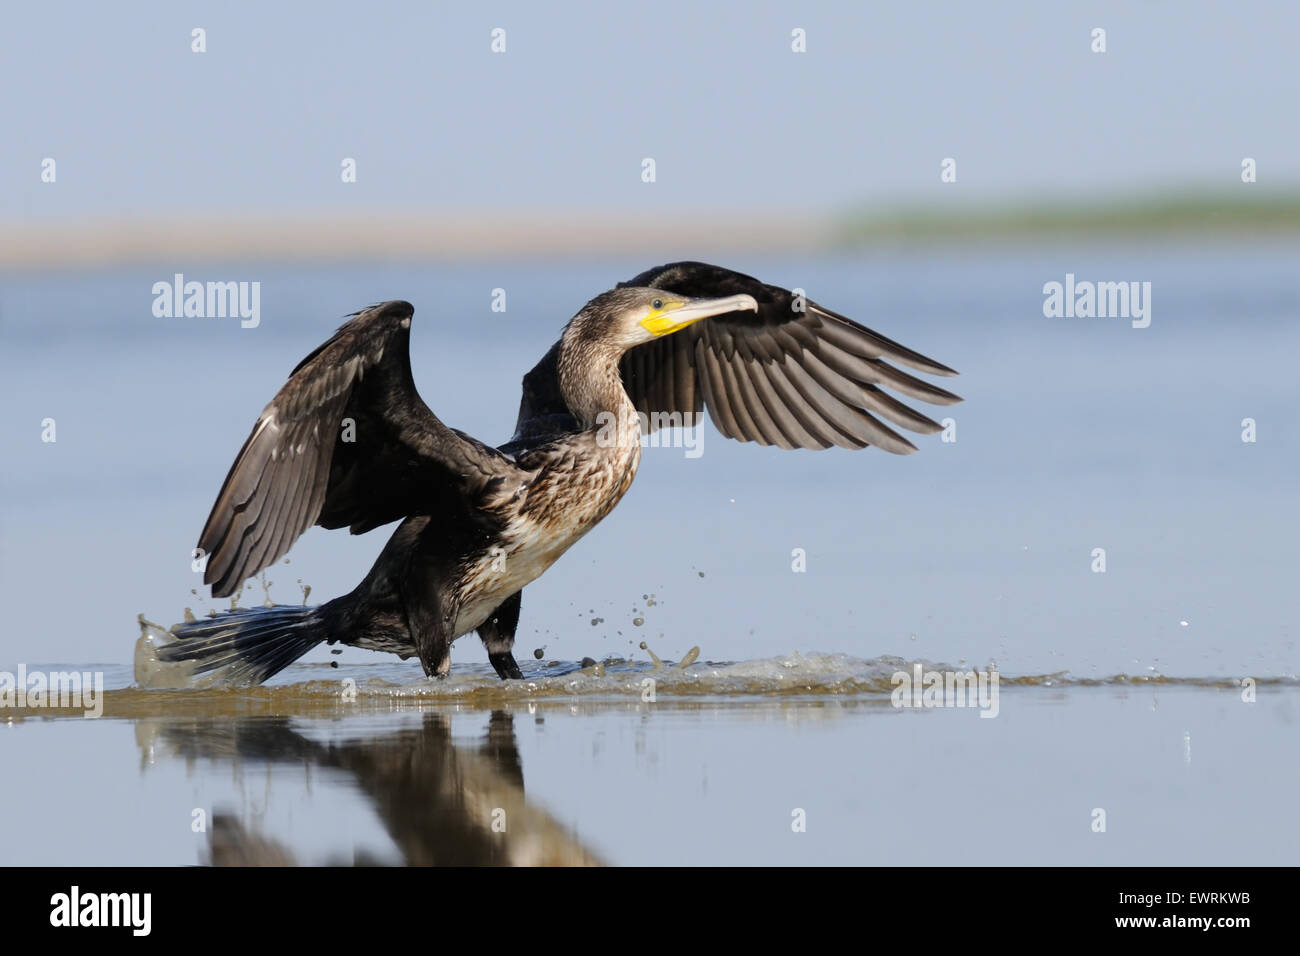 Great Cormorant with open wings at the blue morning lake Stock Photo